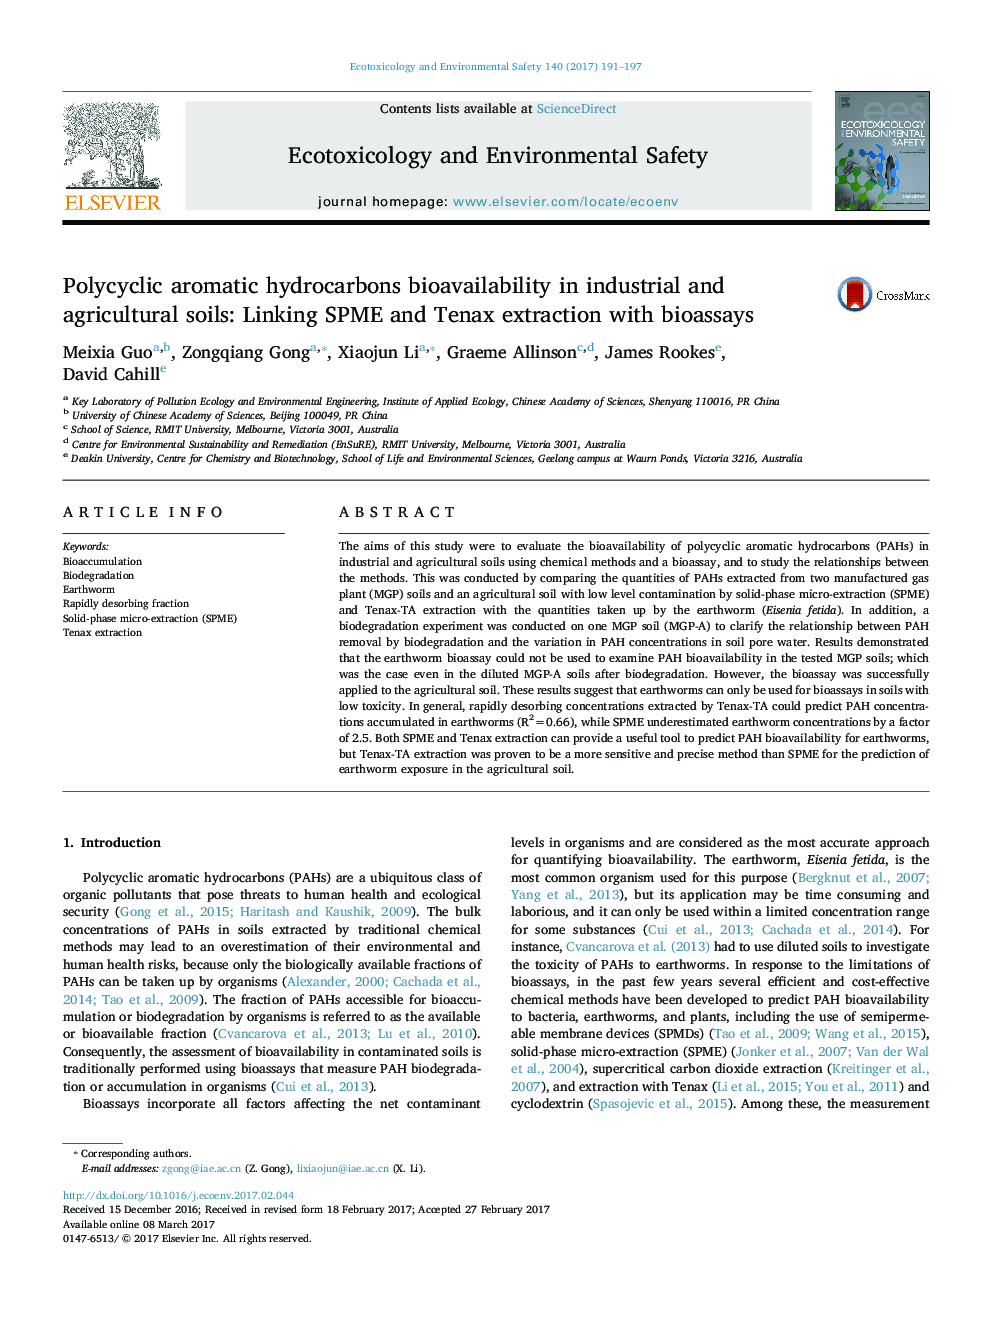 Polycyclic aromatic hydrocarbons bioavailability in industrial and agricultural soils: Linking SPME and Tenax extraction with bioassays